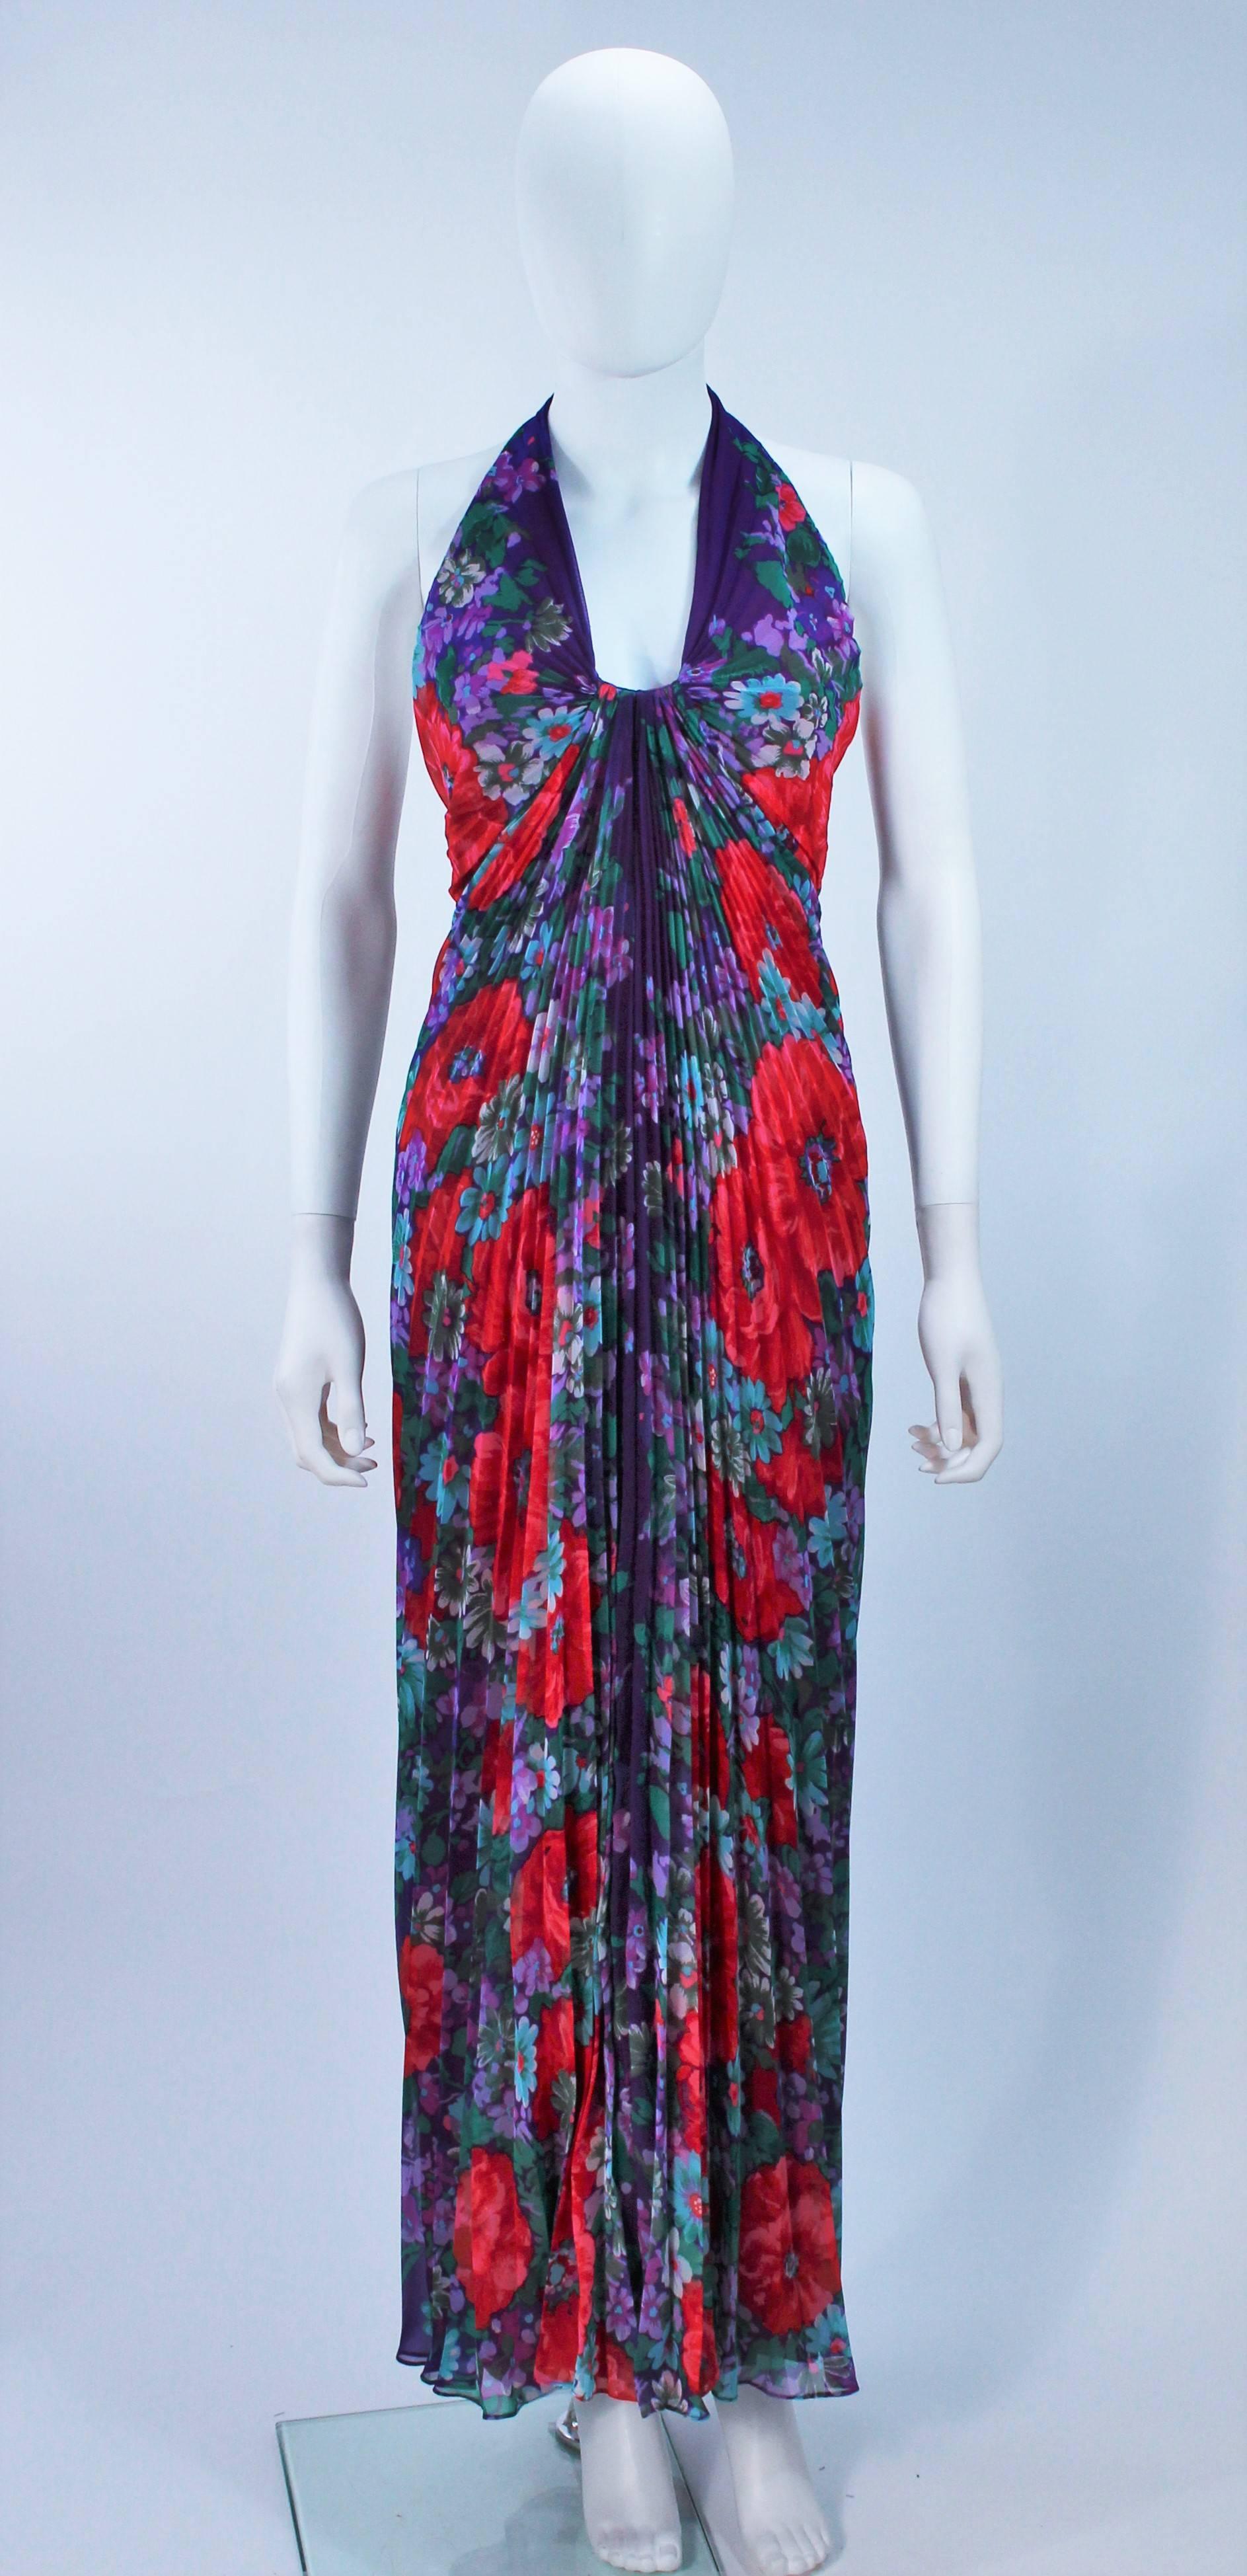  This Travilla  gown is composed of a purple pleated floral print fabric. There is a center back zipper closure. In excellent vintage condition. 

  **Please cross-reference measurements for personal accuracy. Size in description box is an